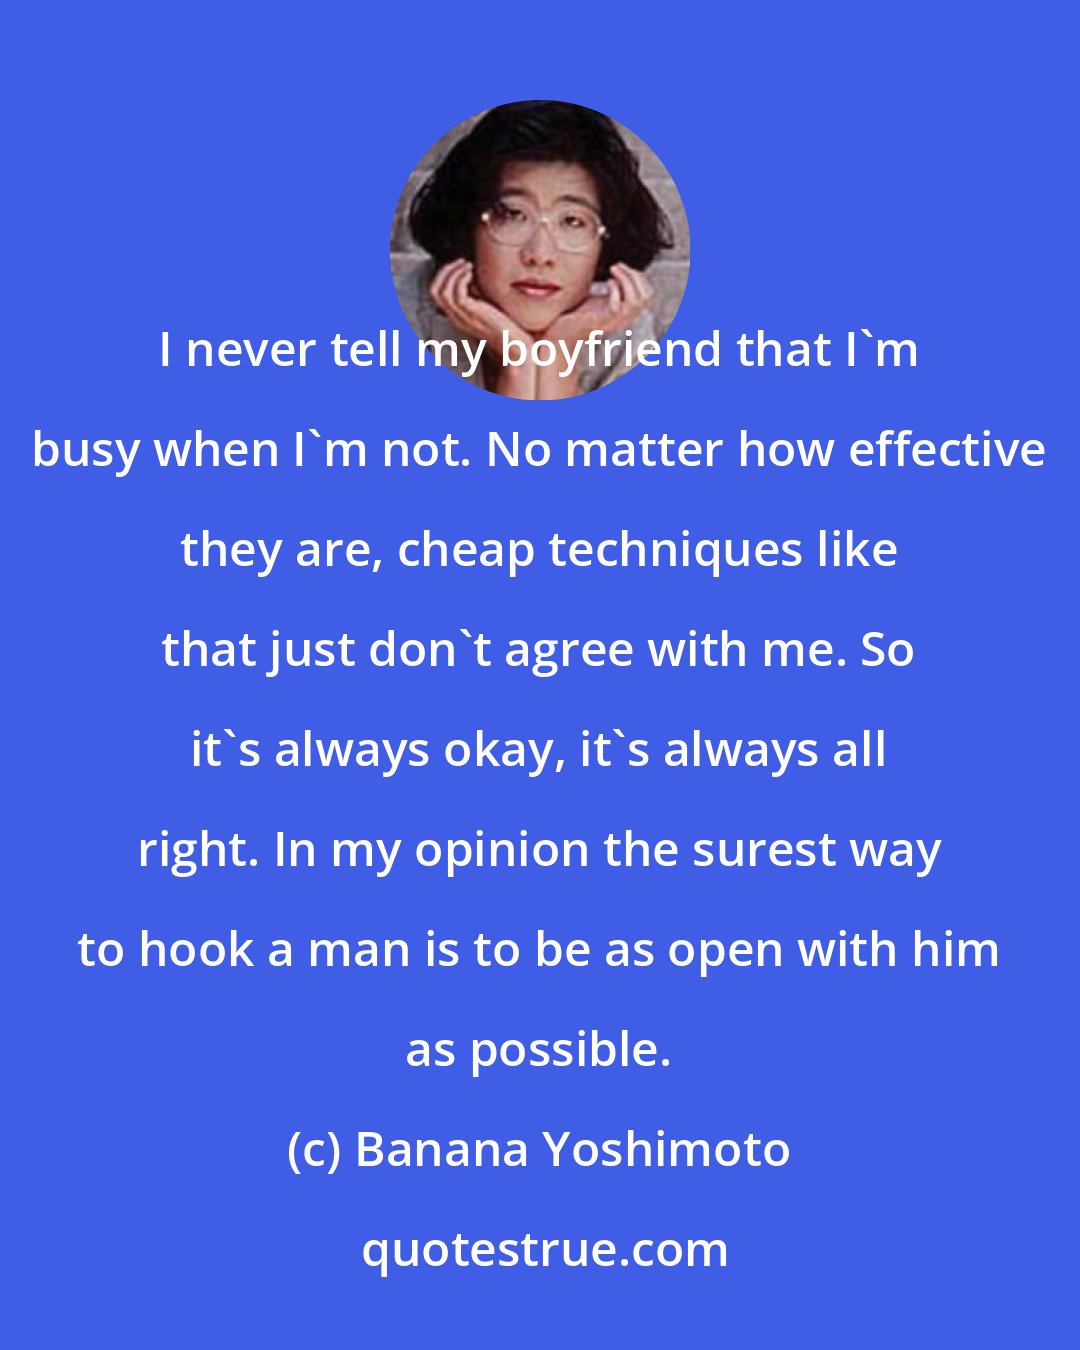 Banana Yoshimoto: I never tell my boyfriend that I'm busy when I'm not. No matter how effective they are, cheap techniques like that just don't agree with me. So it's always okay, it's always all right. In my opinion the surest way to hook a man is to be as open with him as possible.